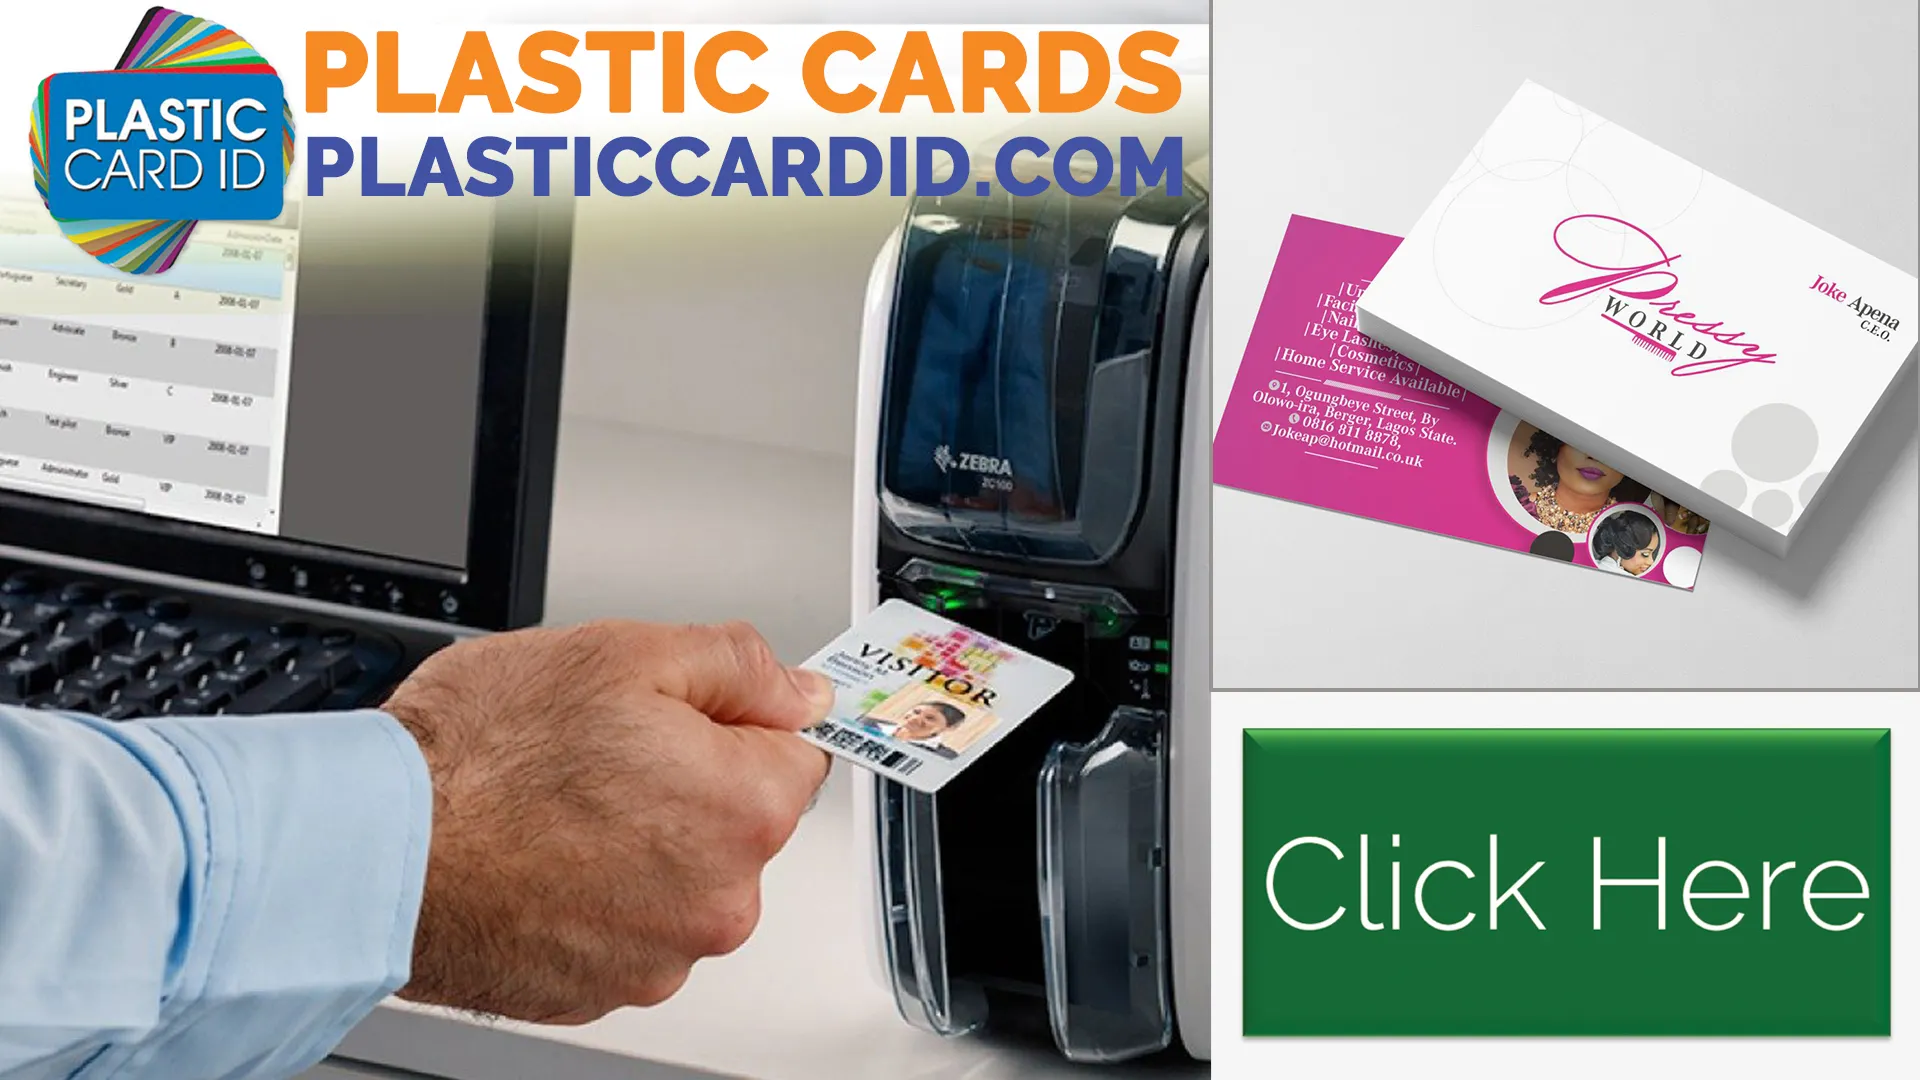 Welcome to Plastic Card ID
: A New Era of Enhanced Badge Security